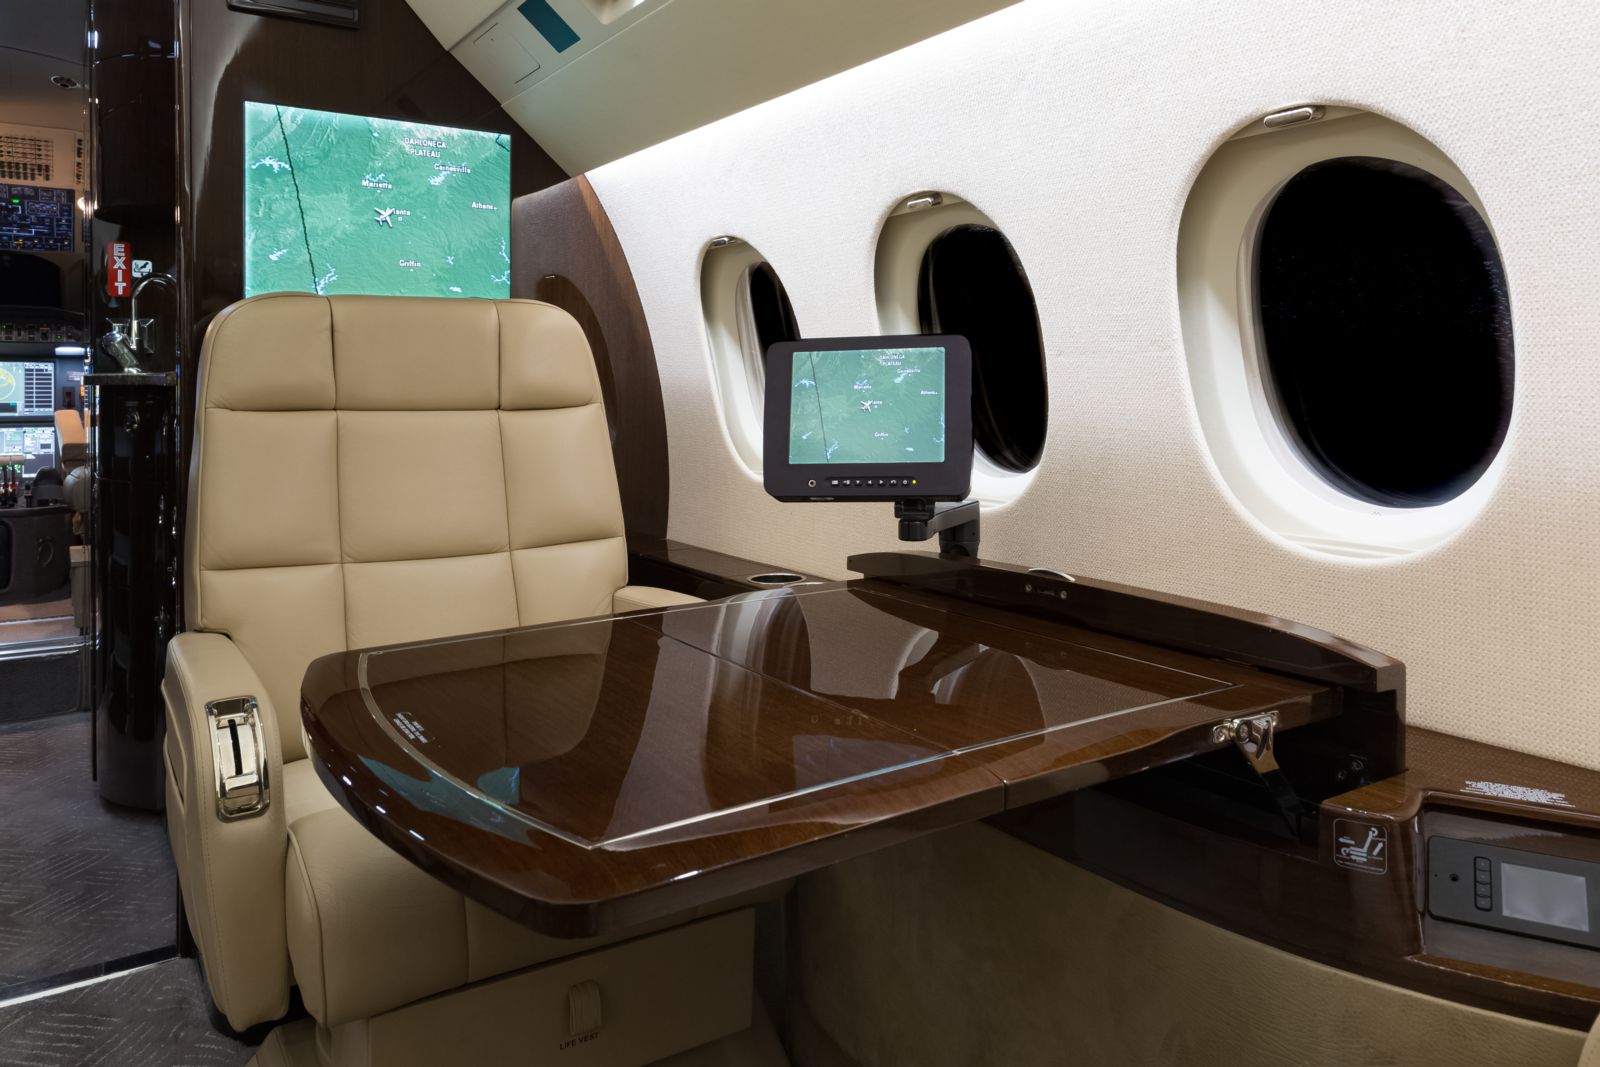 Dassault Falcon 900EX EASy  S/N 233 for sale | gallery image: /userfiles/files/vip.jpg